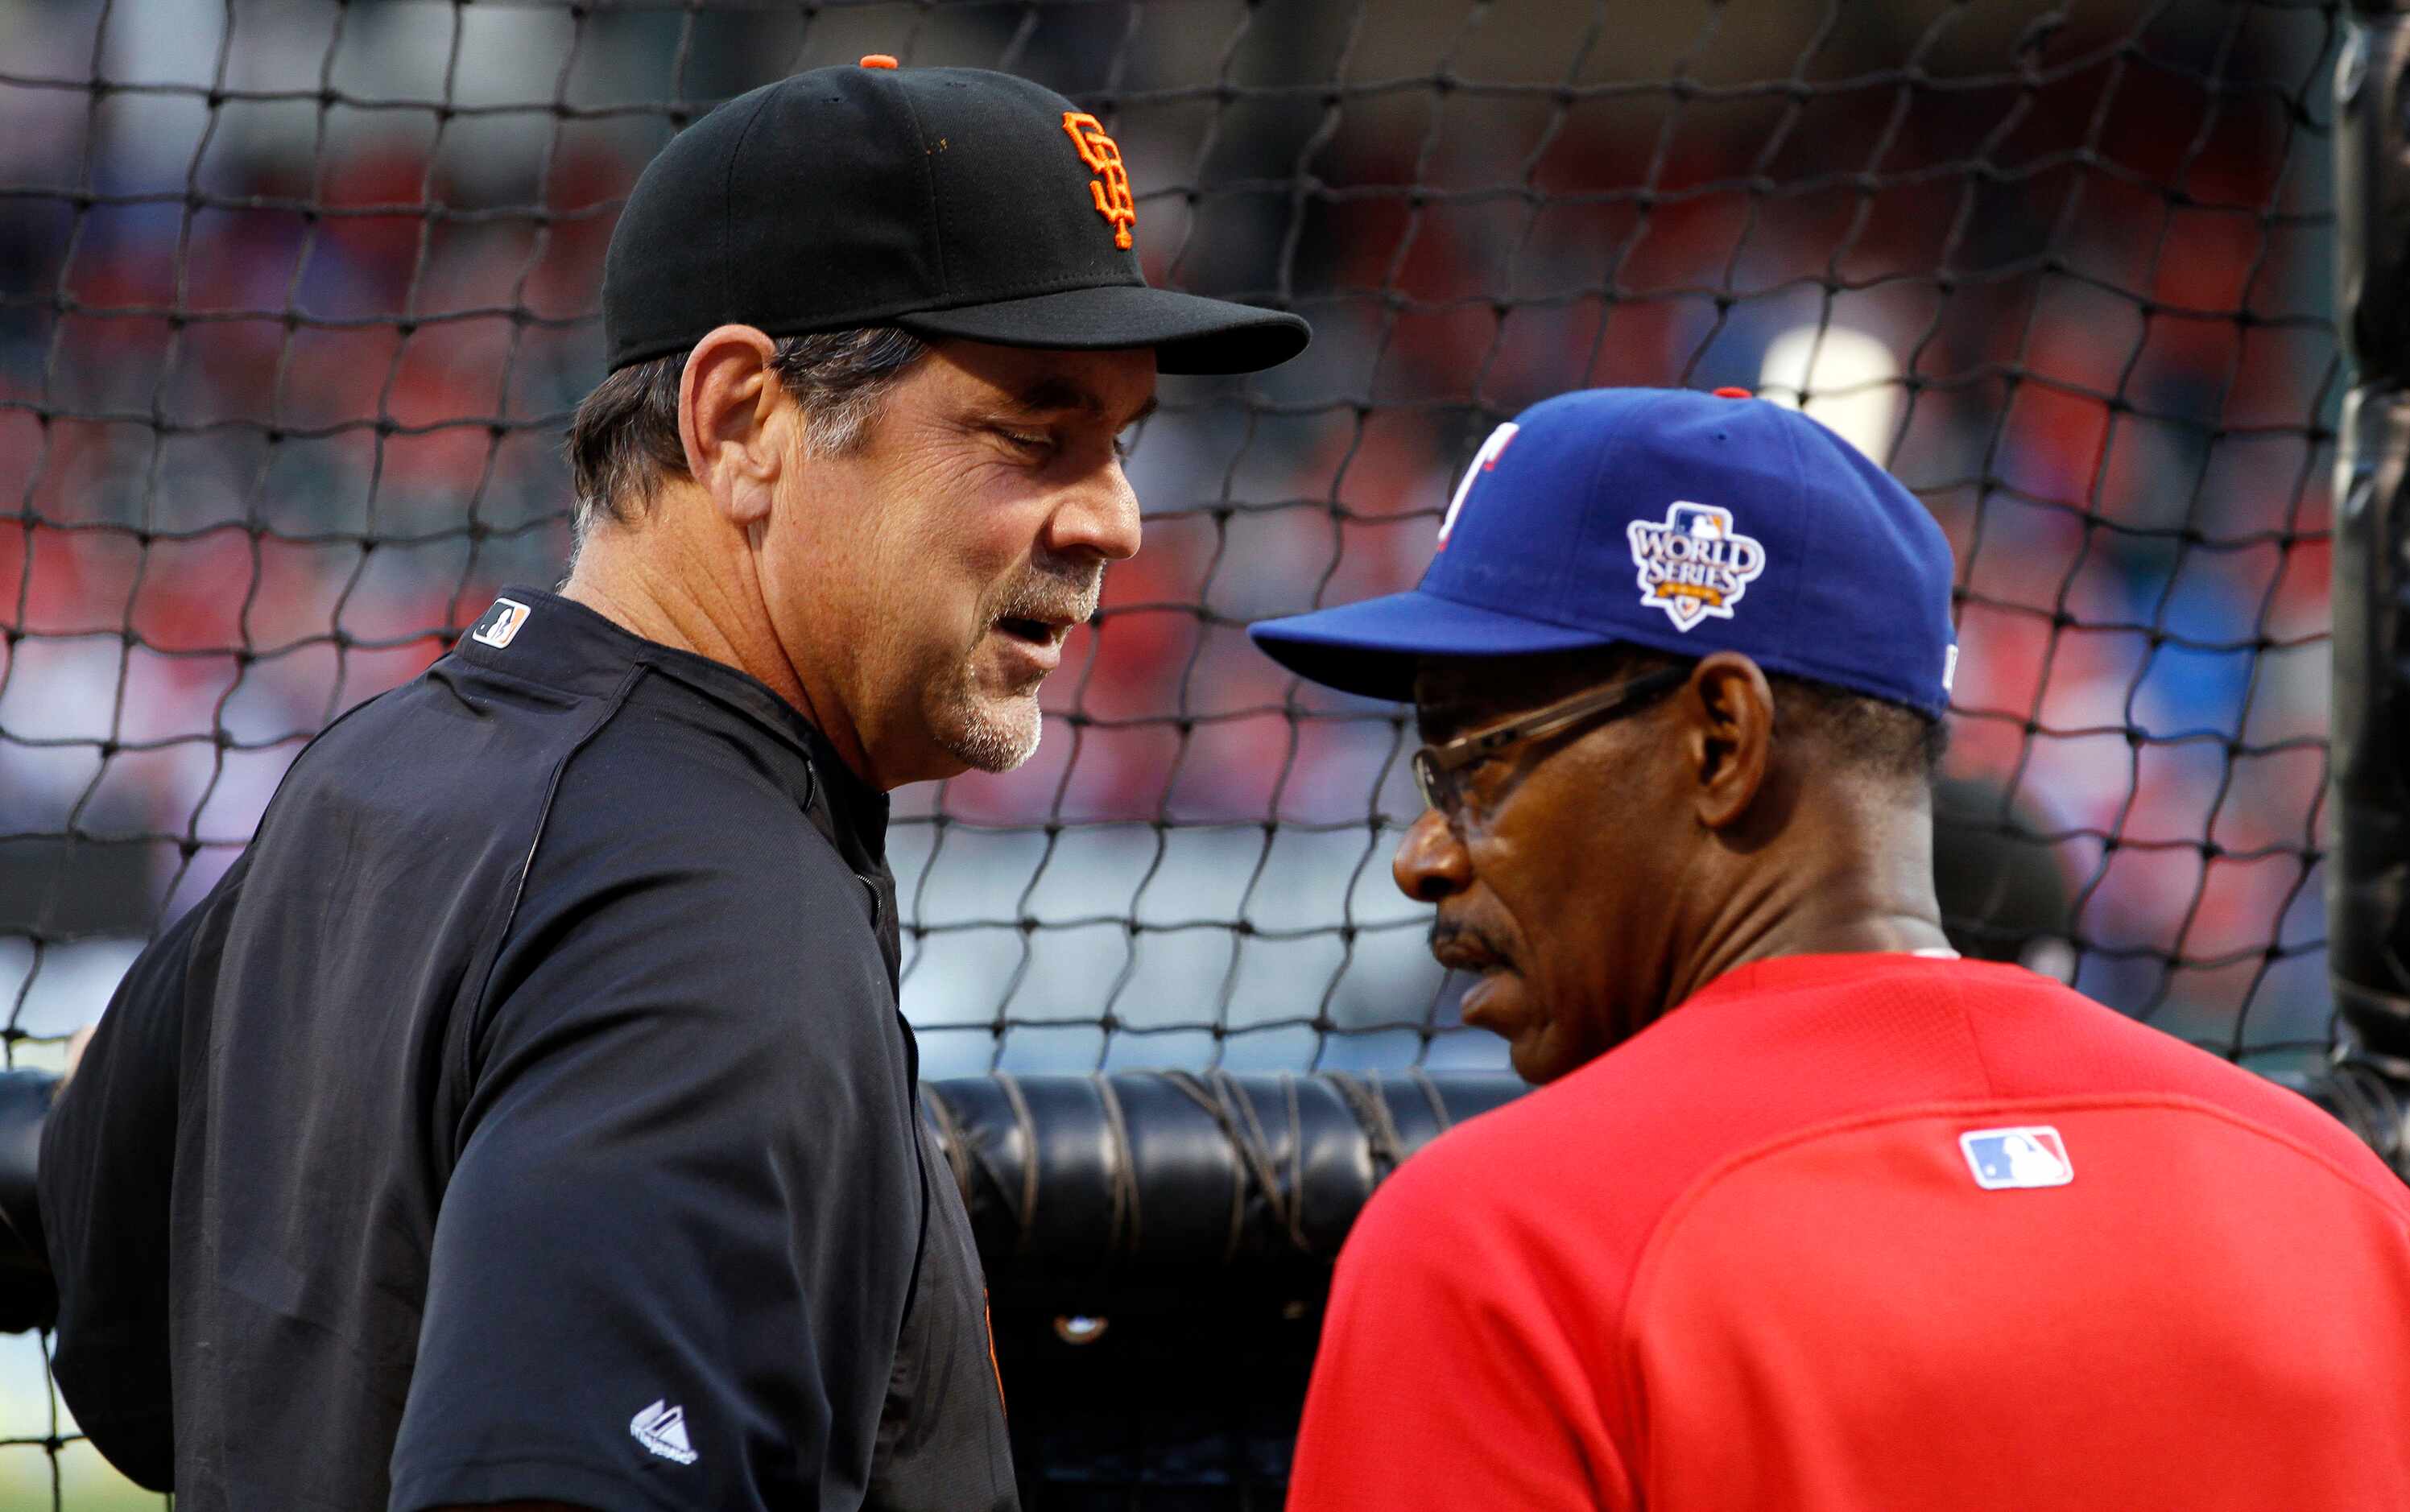 ORG XMIT: WS213 San Francisco Giants manager Bruce Bochy, left, talks to Texas Rangers...